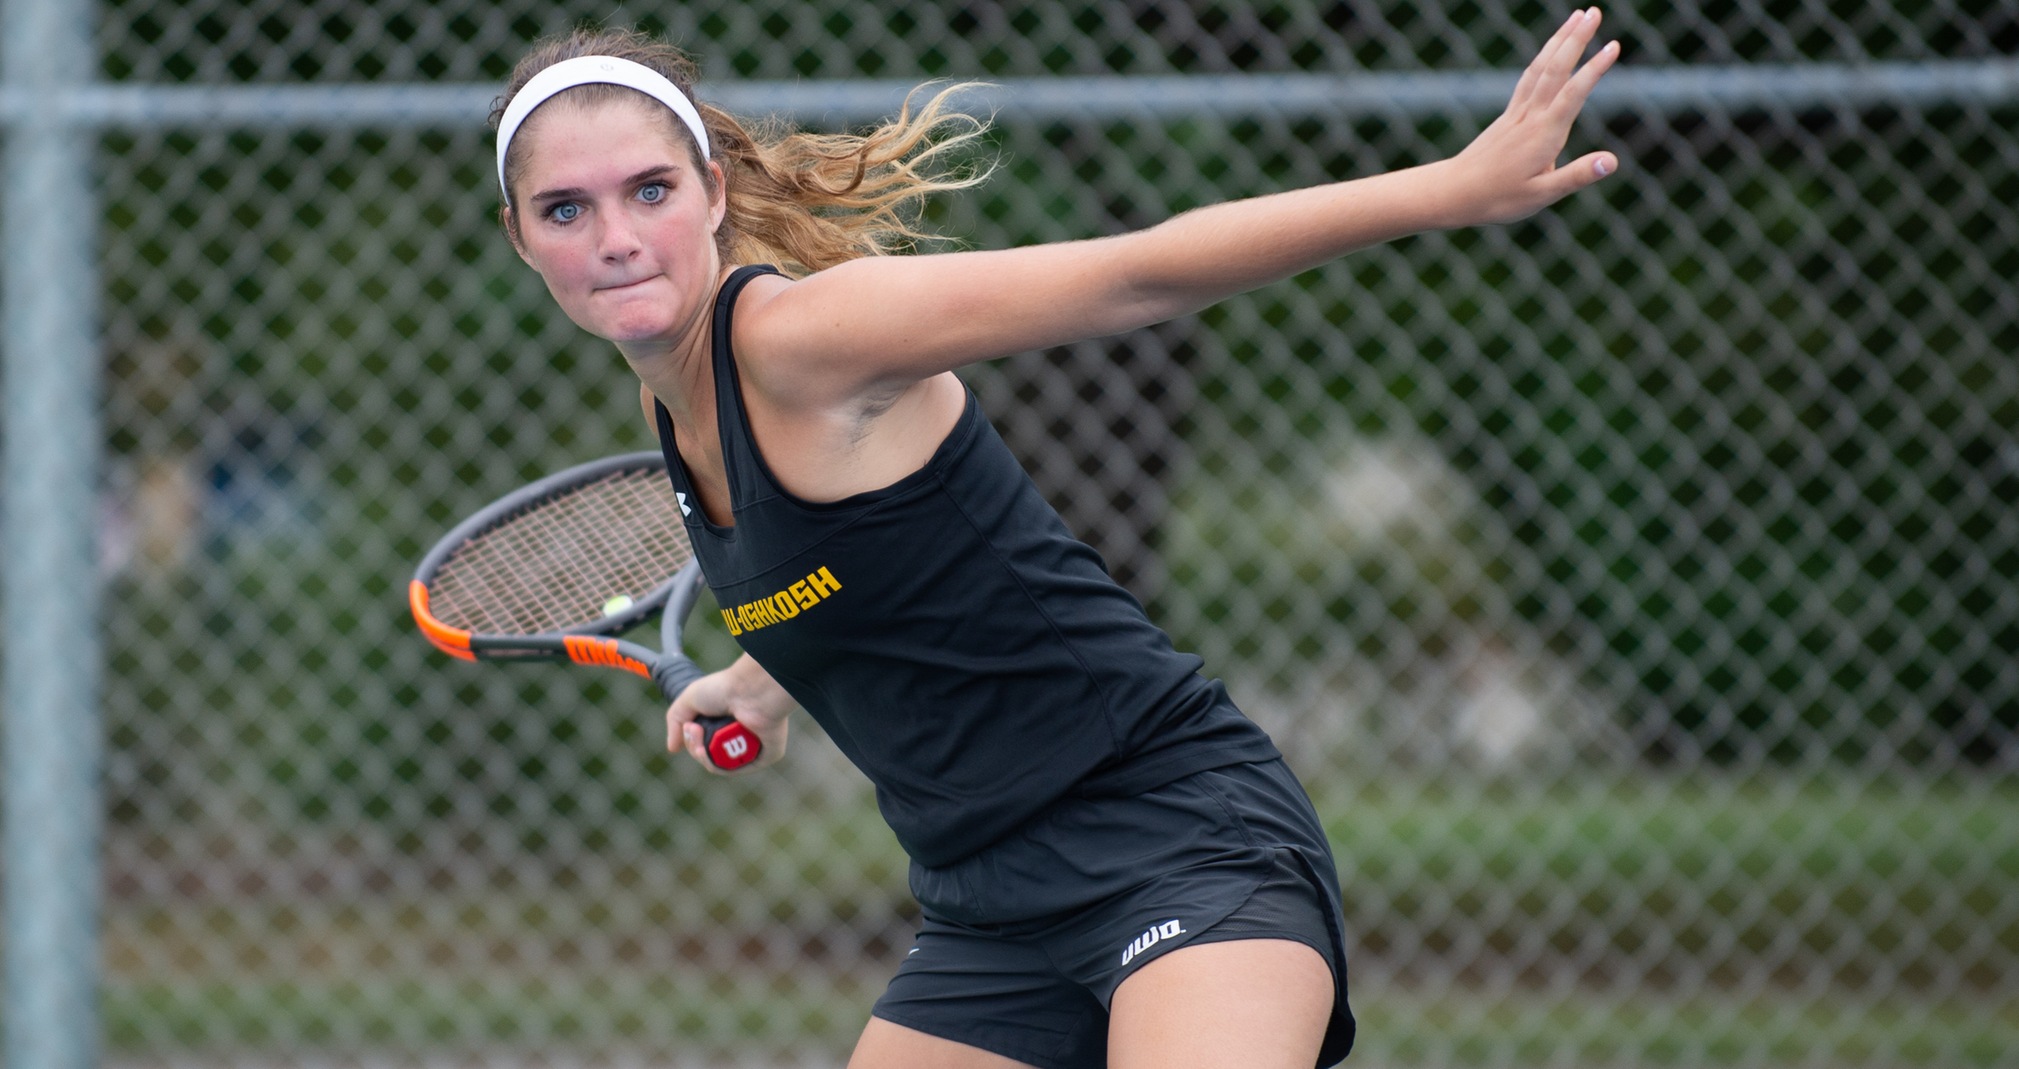 Alyssa Leffler helped the Titans to their third straight victory by winning contests at No. 1 singles and No. 2 doubles.